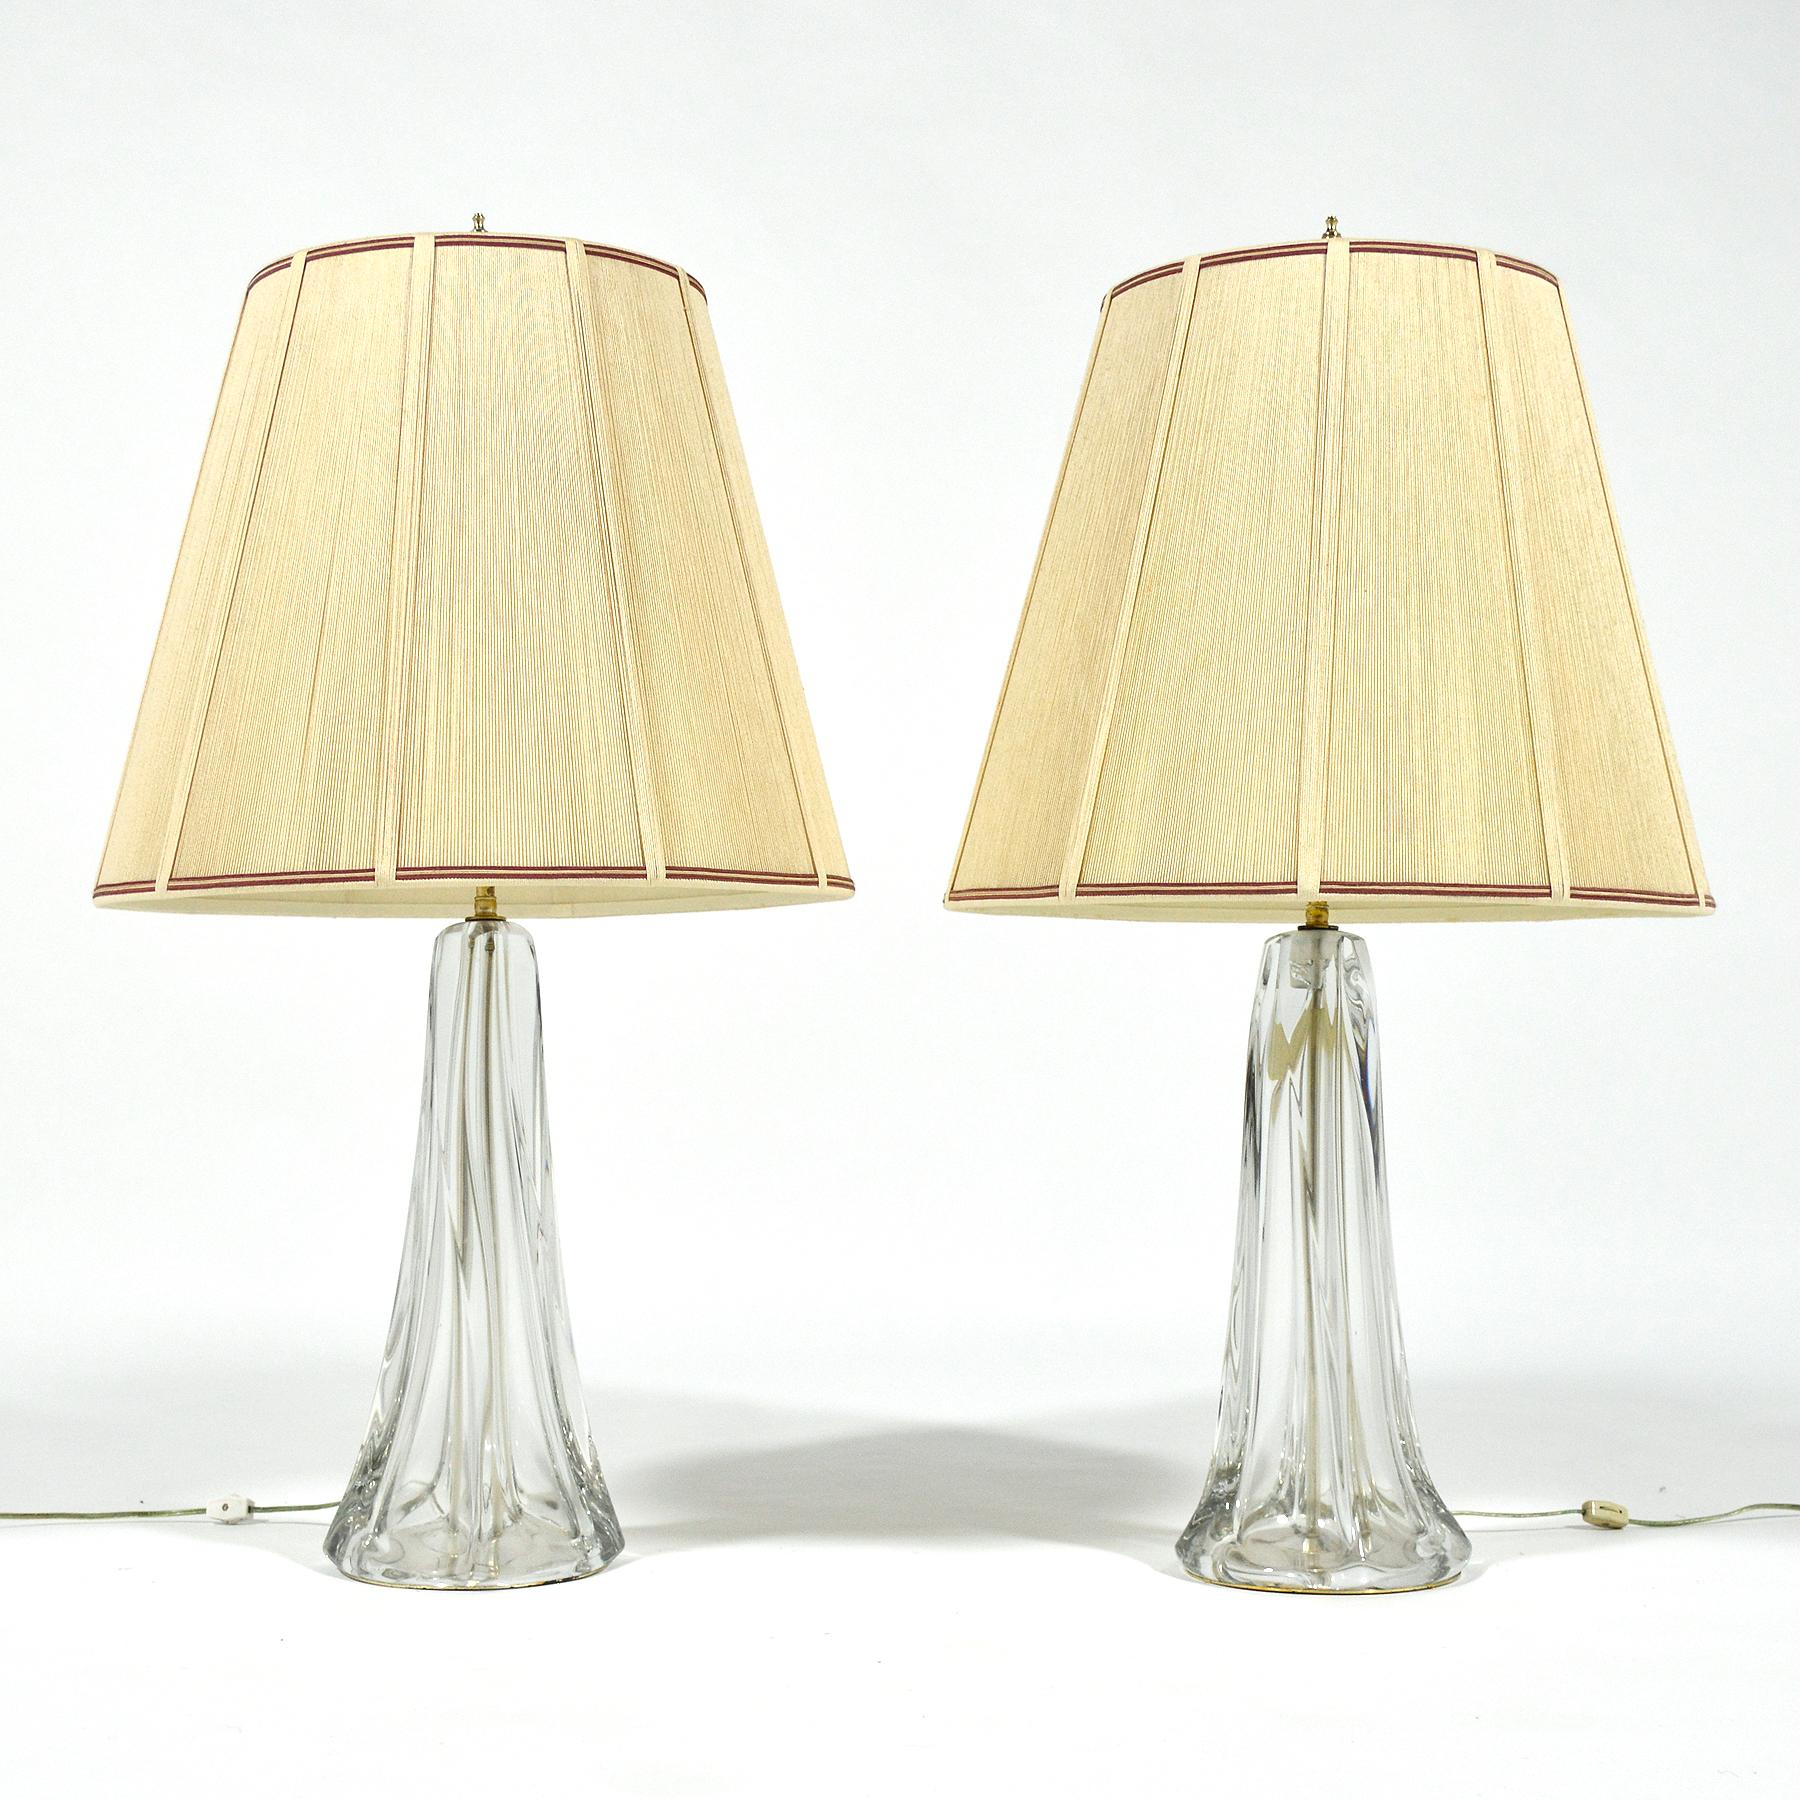 This pair of large crystal table lamps are unmarked, but are very similar to works by Val St Lambert. The substantial clear bases have a swirled form and support their original handmade string shades.